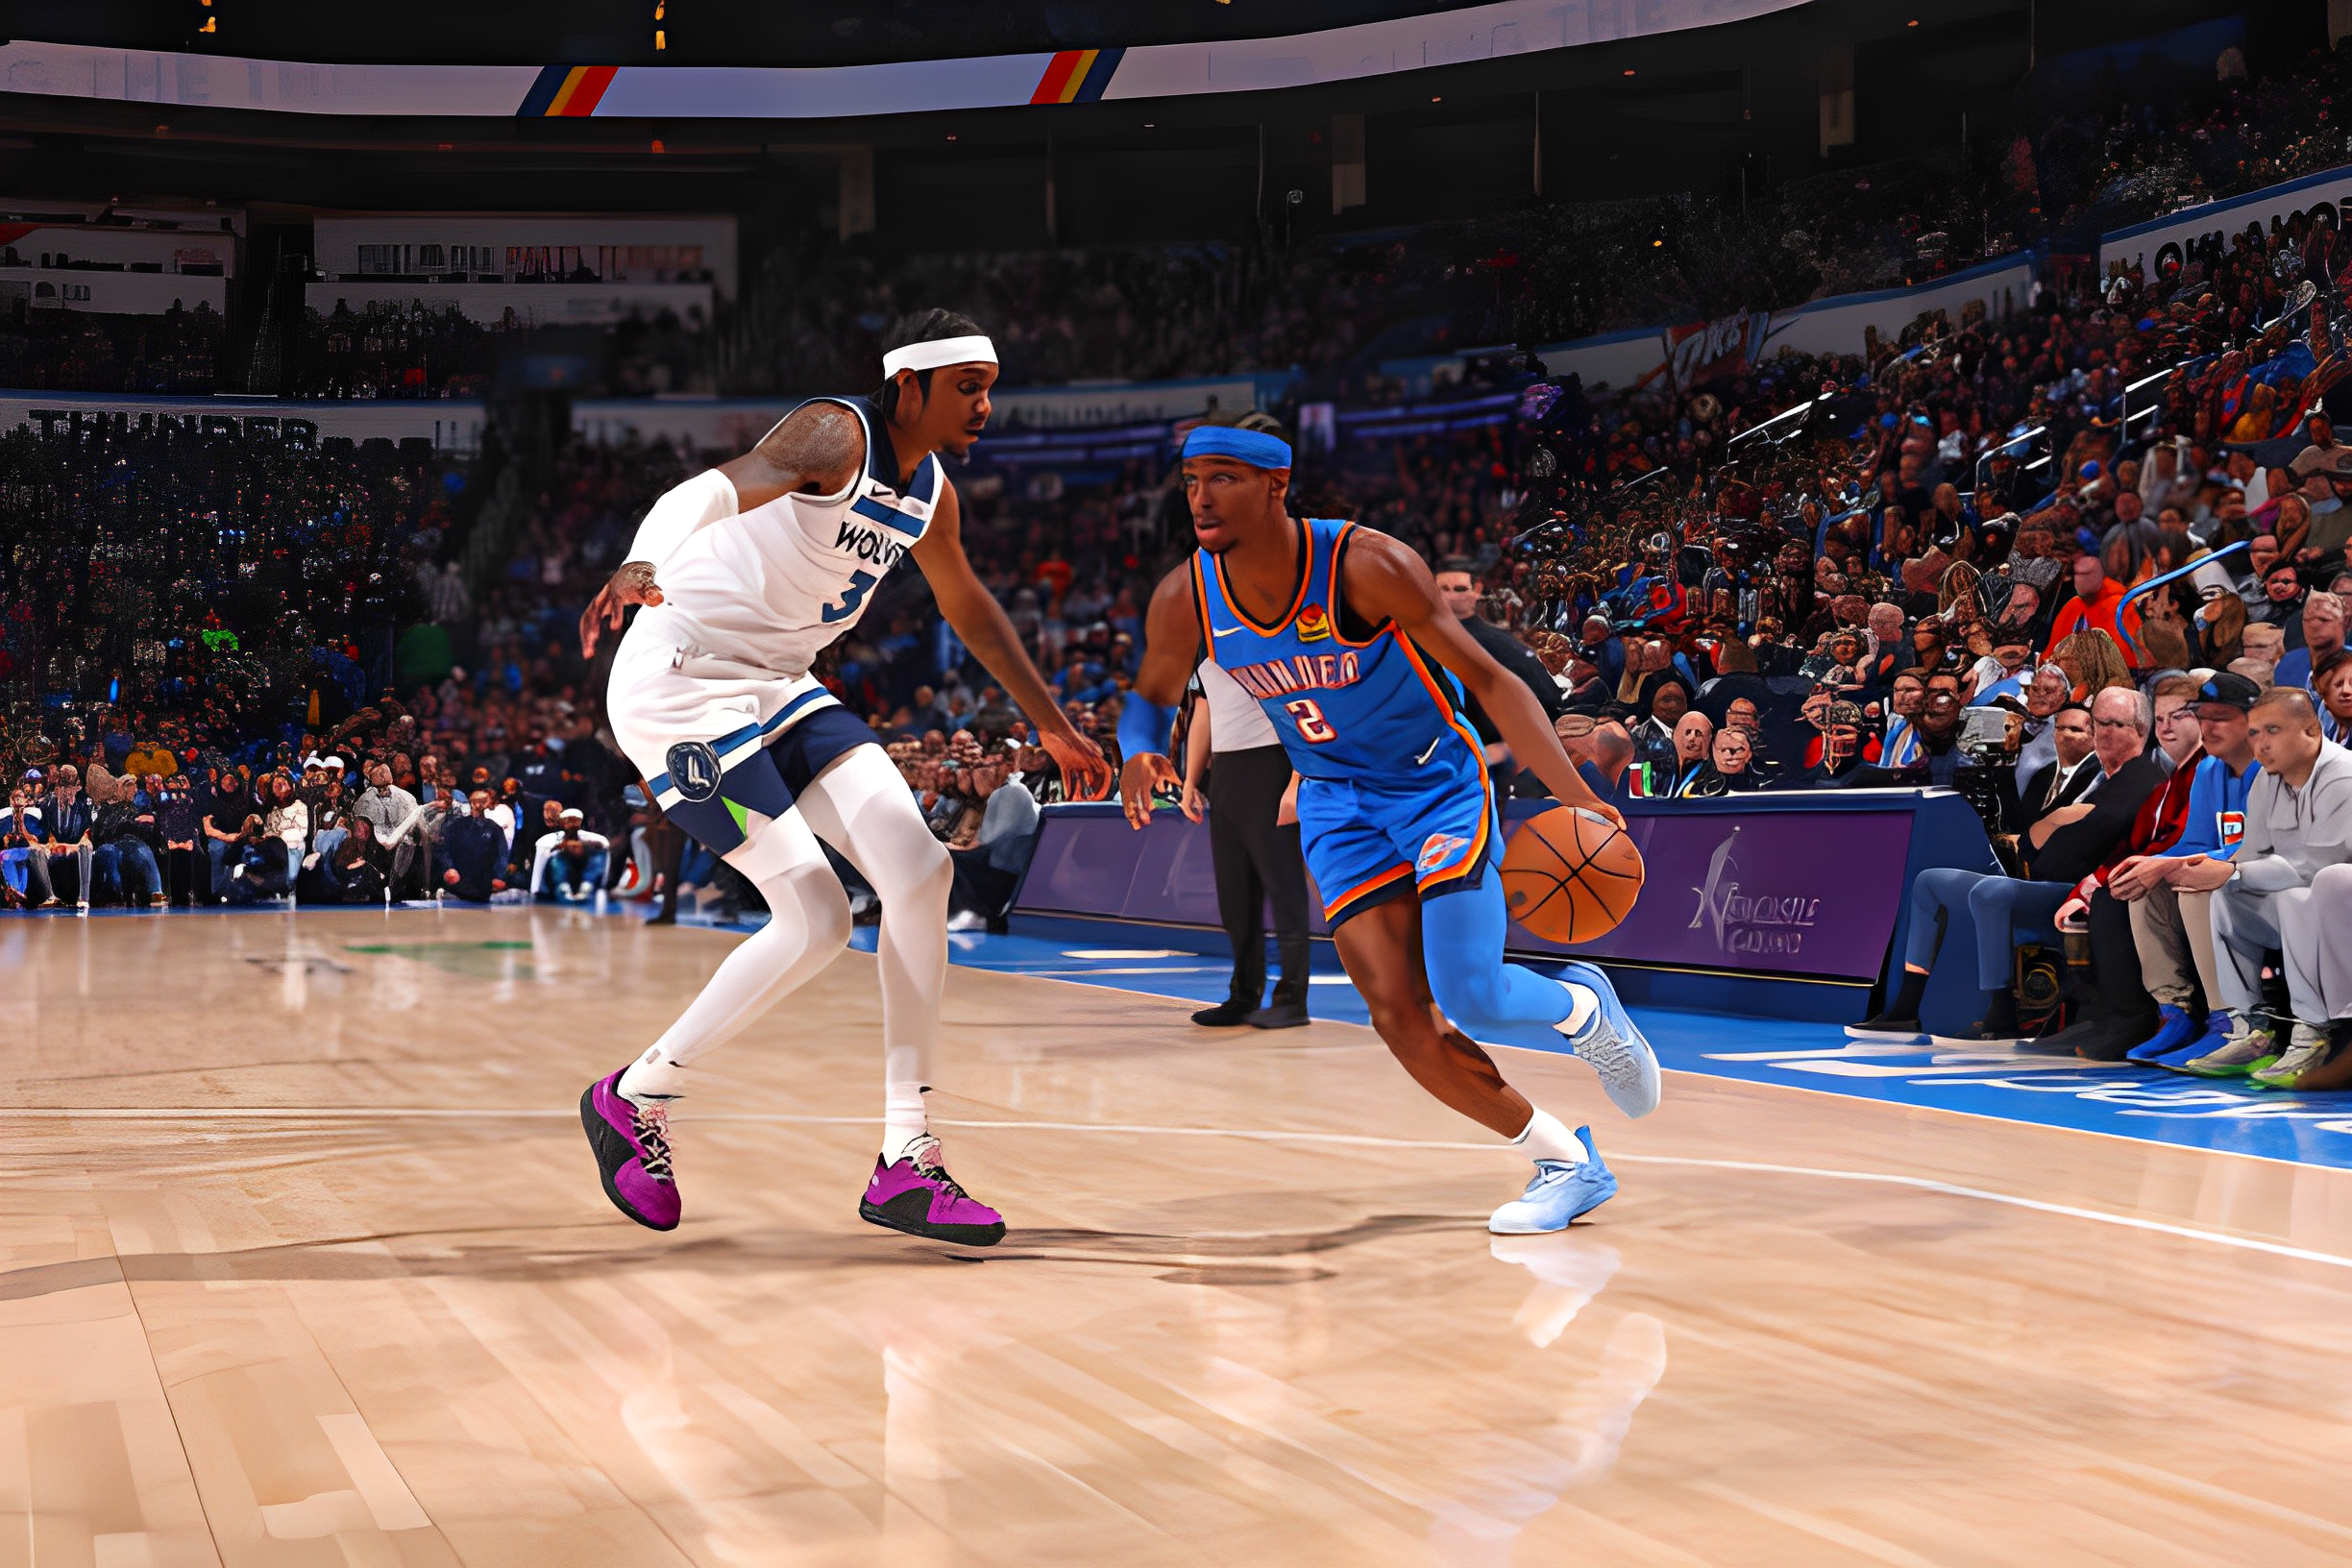 Shai Gilgeous-Alexander dribbling the ball for the Oklahoma City Thunder against the Minnesota Timberwolves at Paycom Arena.